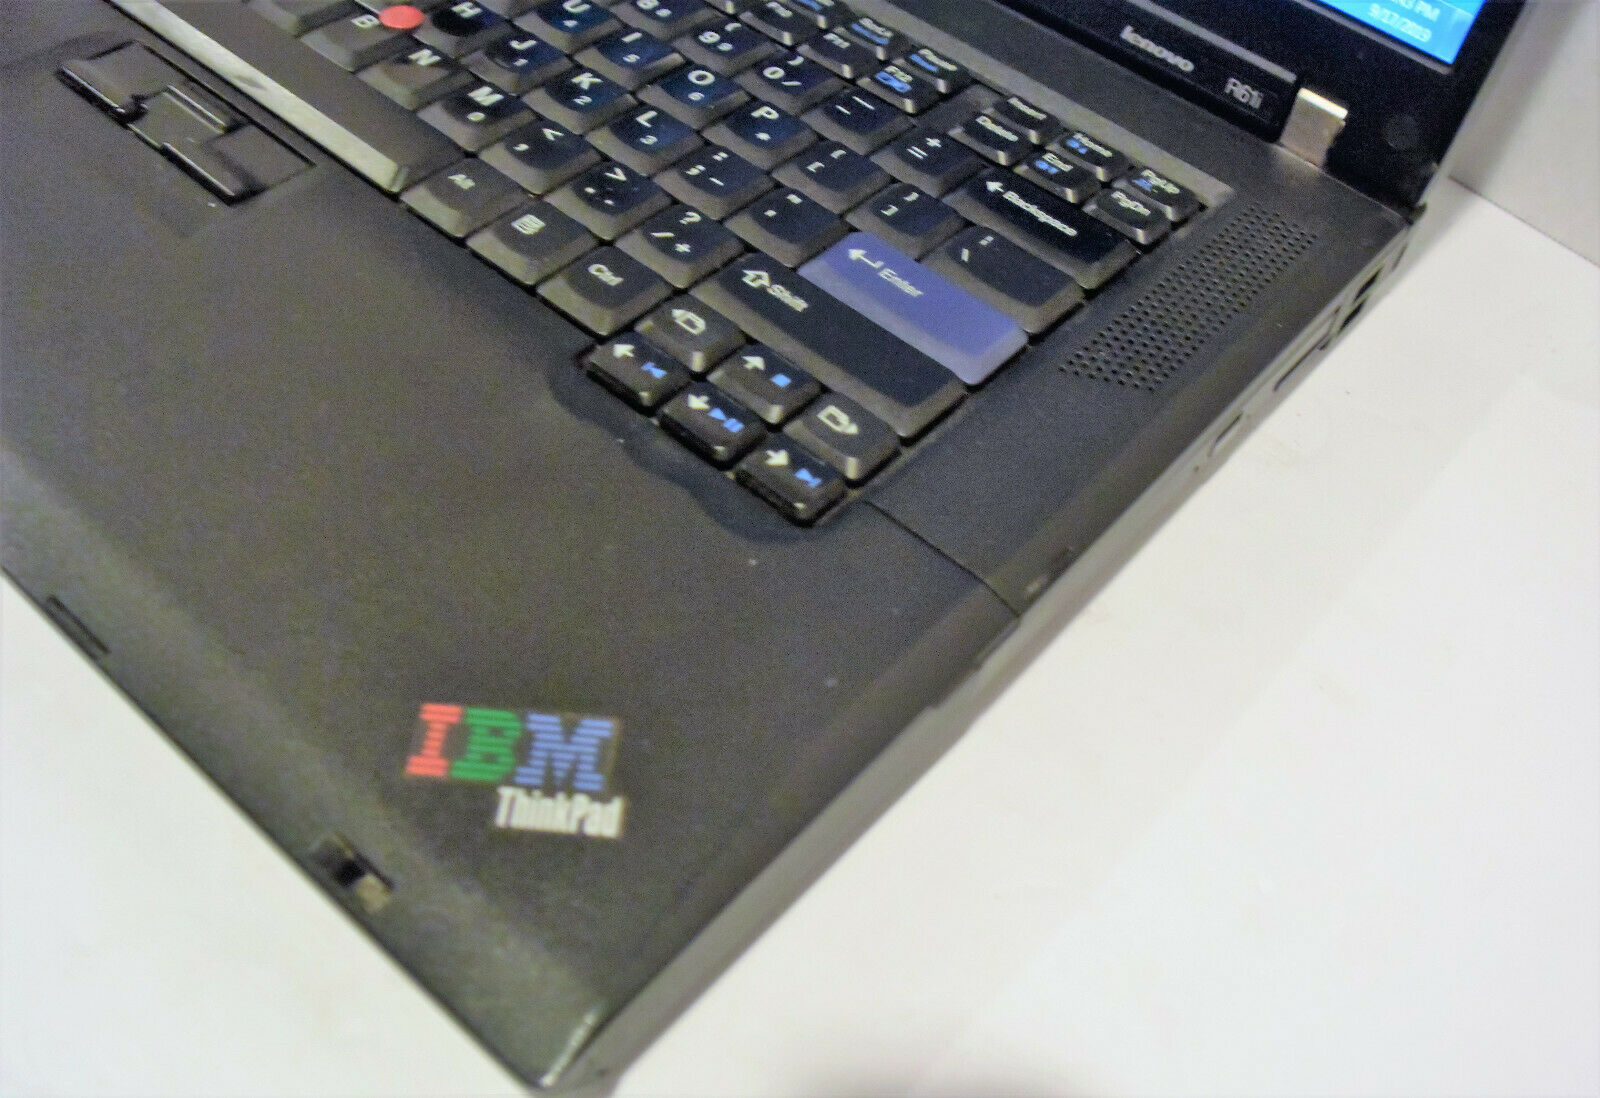 Used Lenovo ThinkPad R61 15.4in. Notebook/Laptop in Black (Intel Core 2 Duo 1.5GHz 2GB 80GB) - image 2 of 5